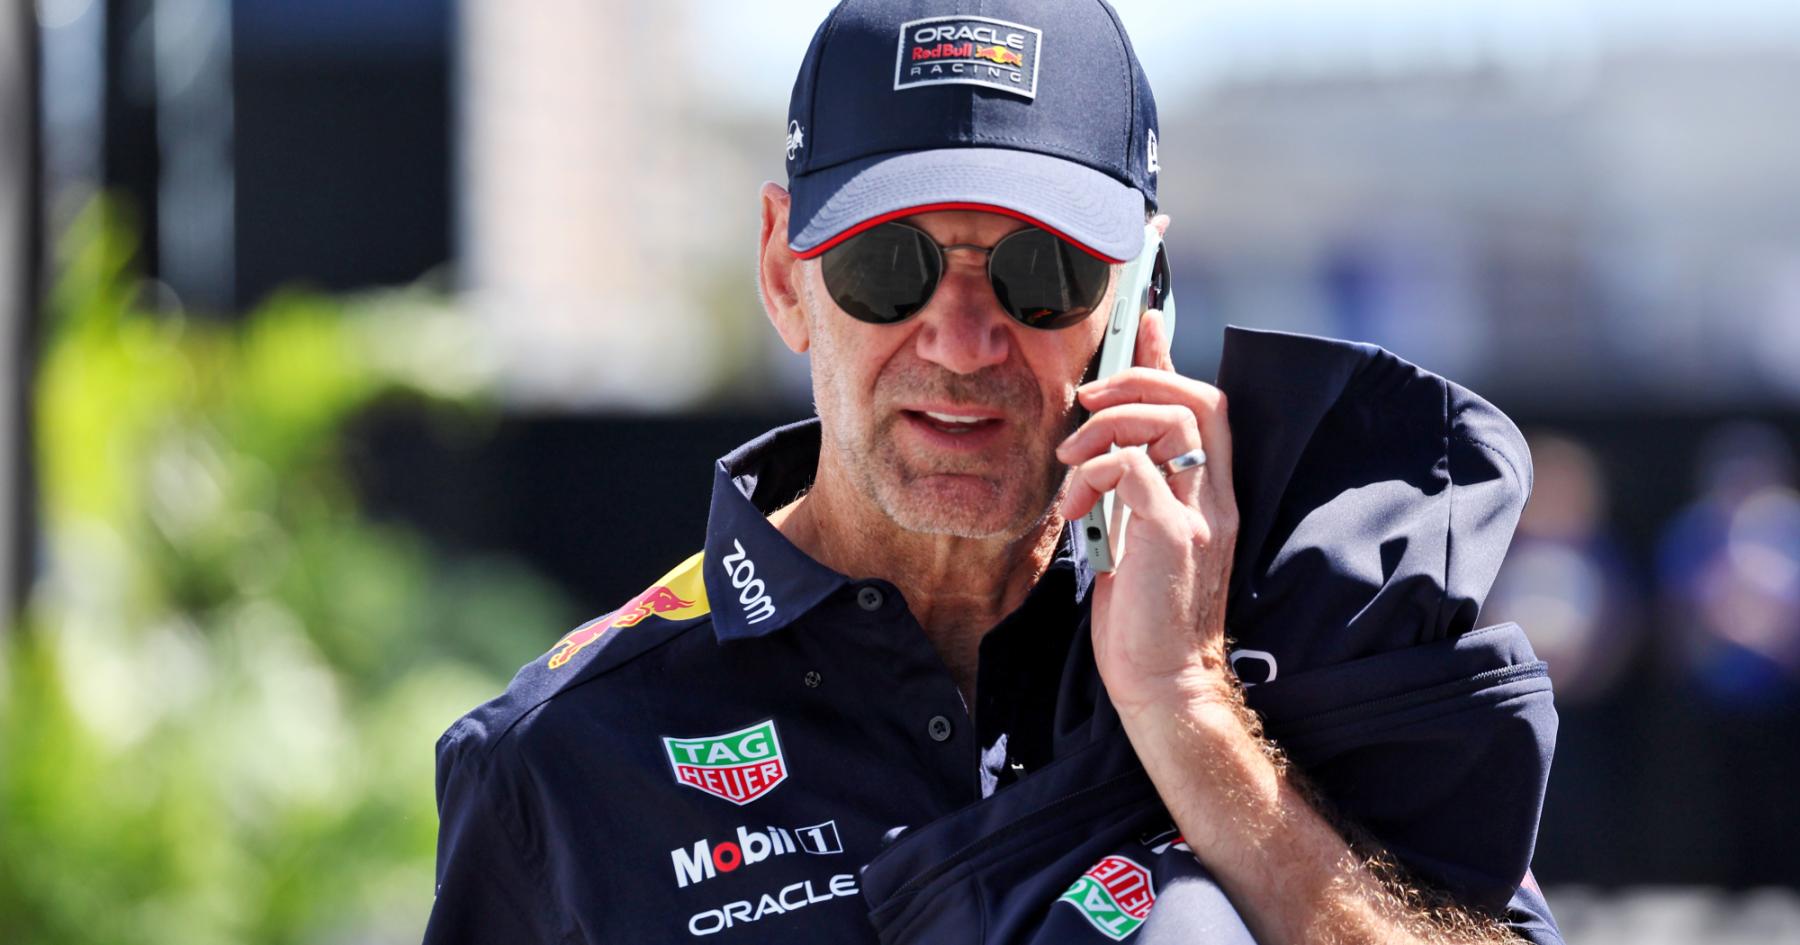 Revolution in F1: Adrian Newey's Departure from Red Bull Racing Looming